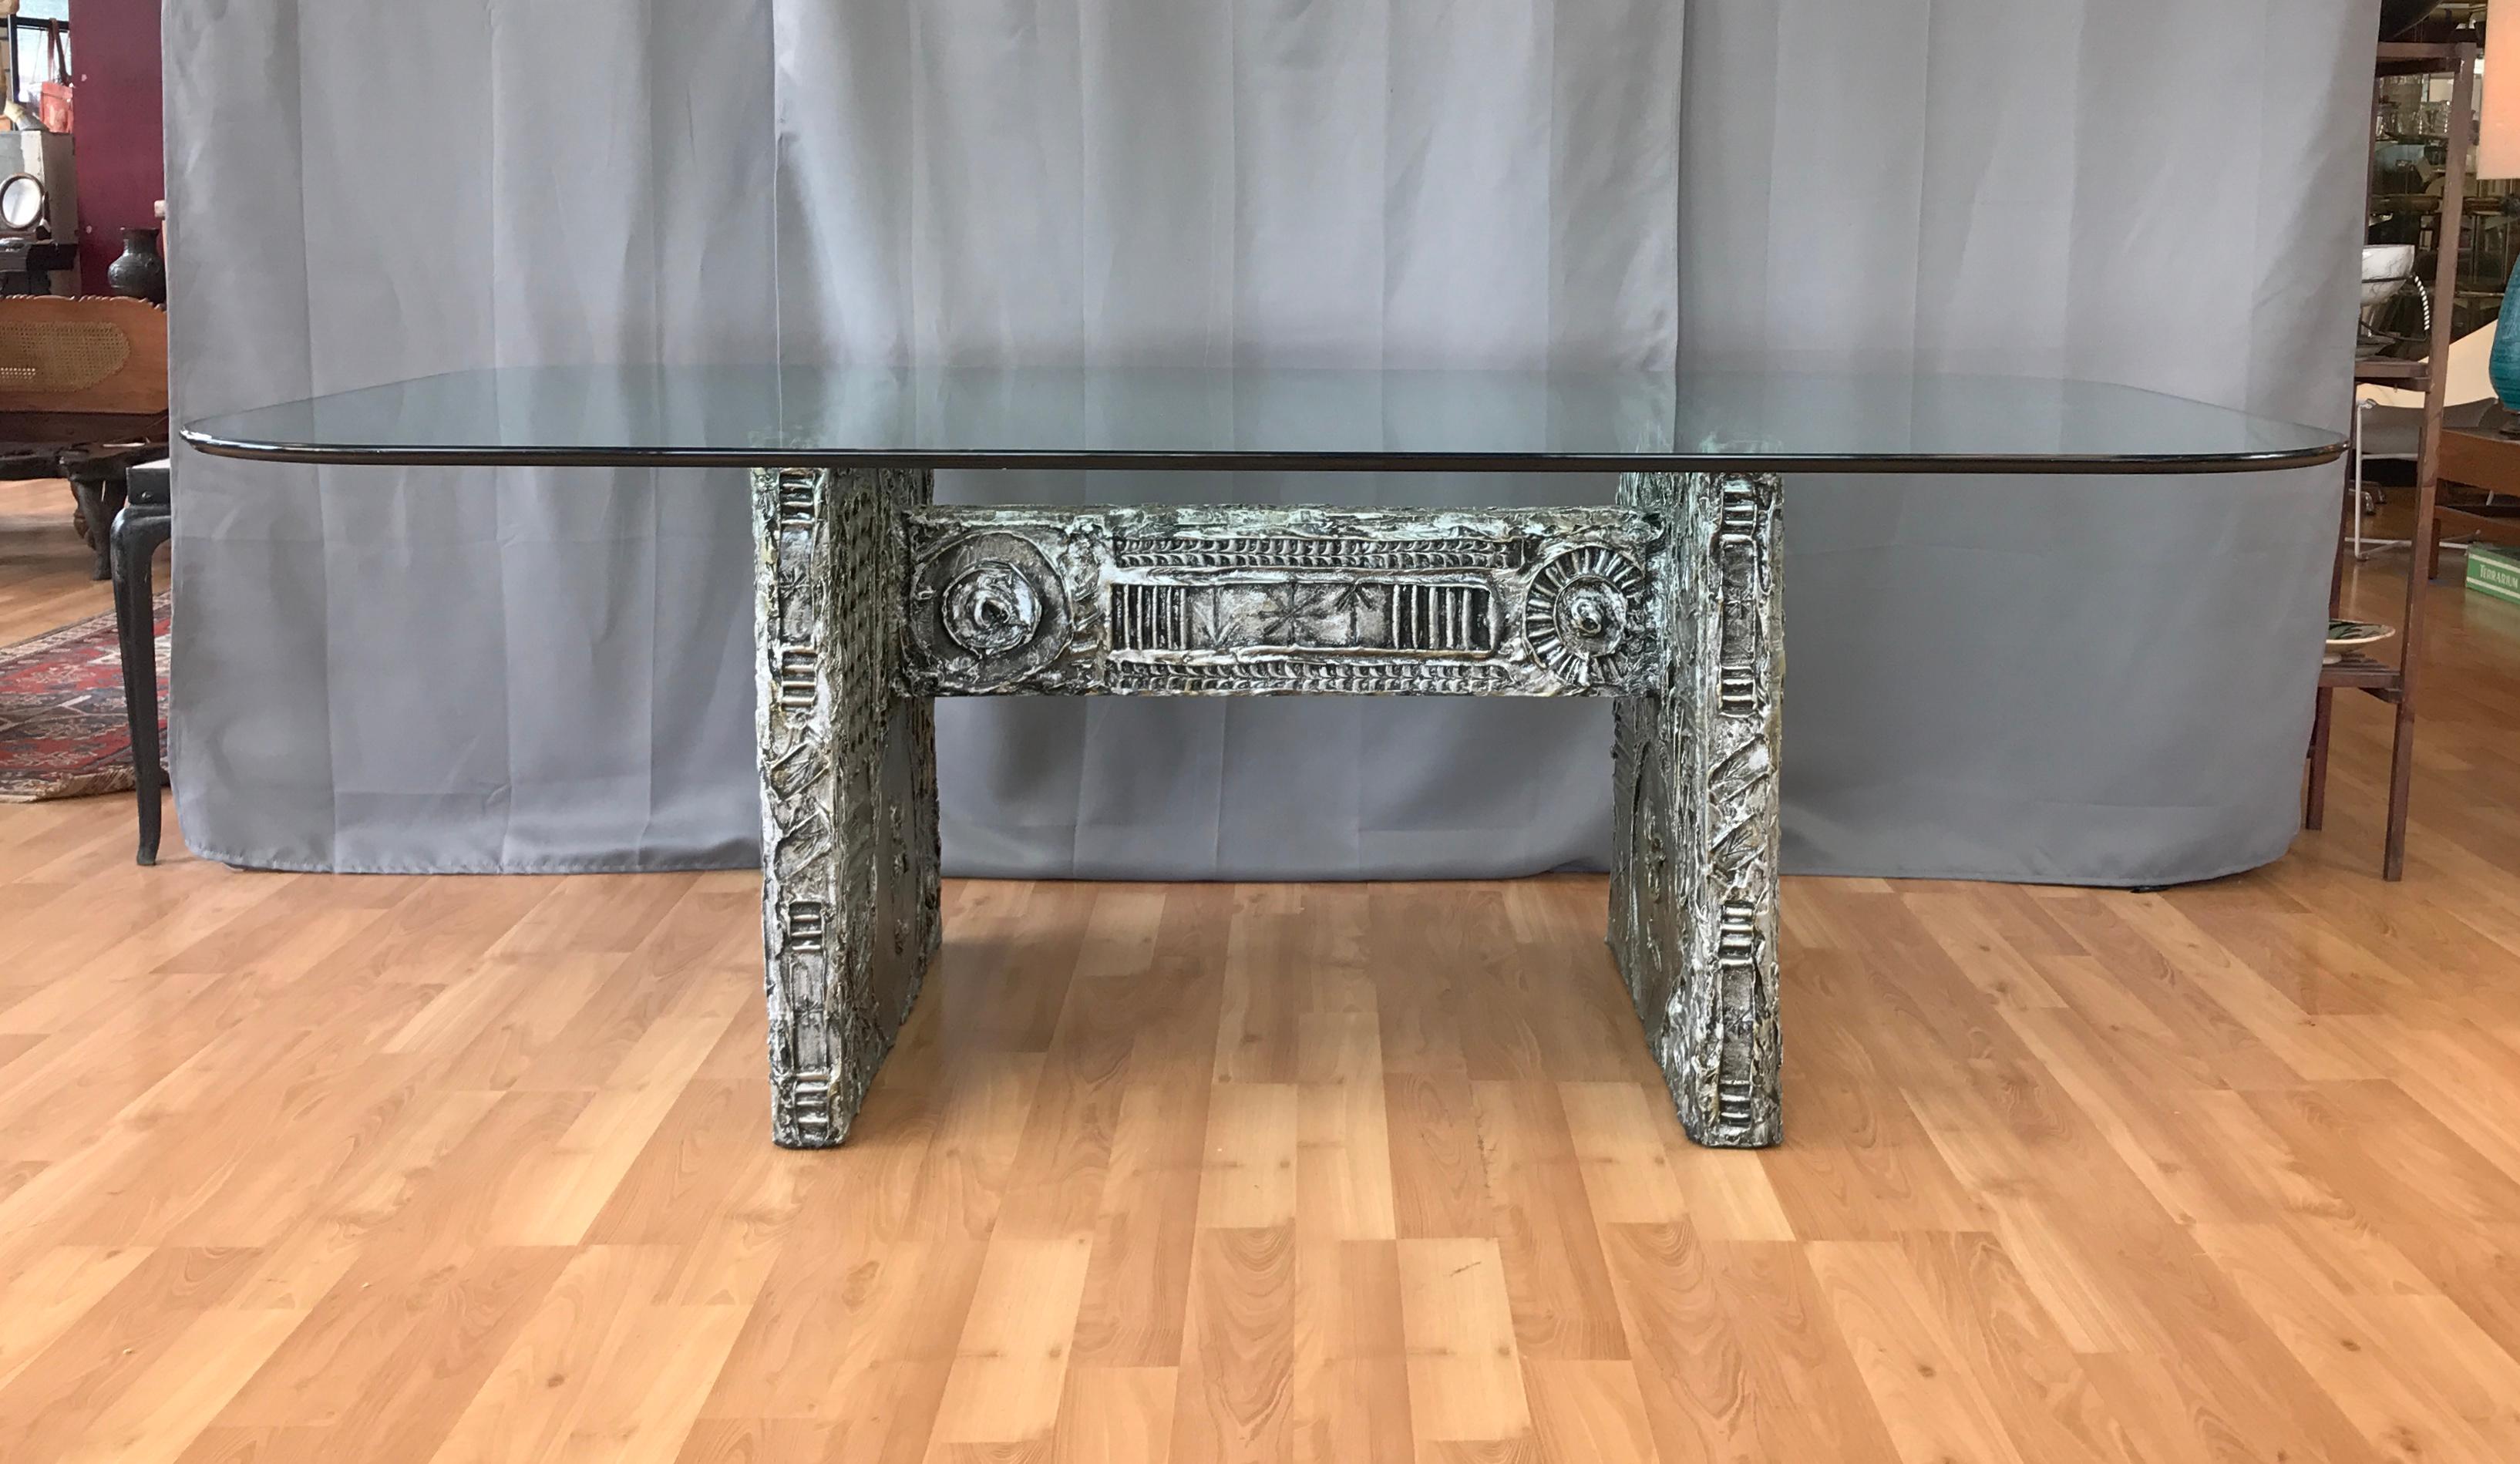 An impressive and less common 1960s Brutalist dining table with glass top by Adrian Pearsall for Craft Associates.

Substantial three-piece wood slab base covered in highly detailed, deep relief, hand sculpted resin with a patinated silver finish.